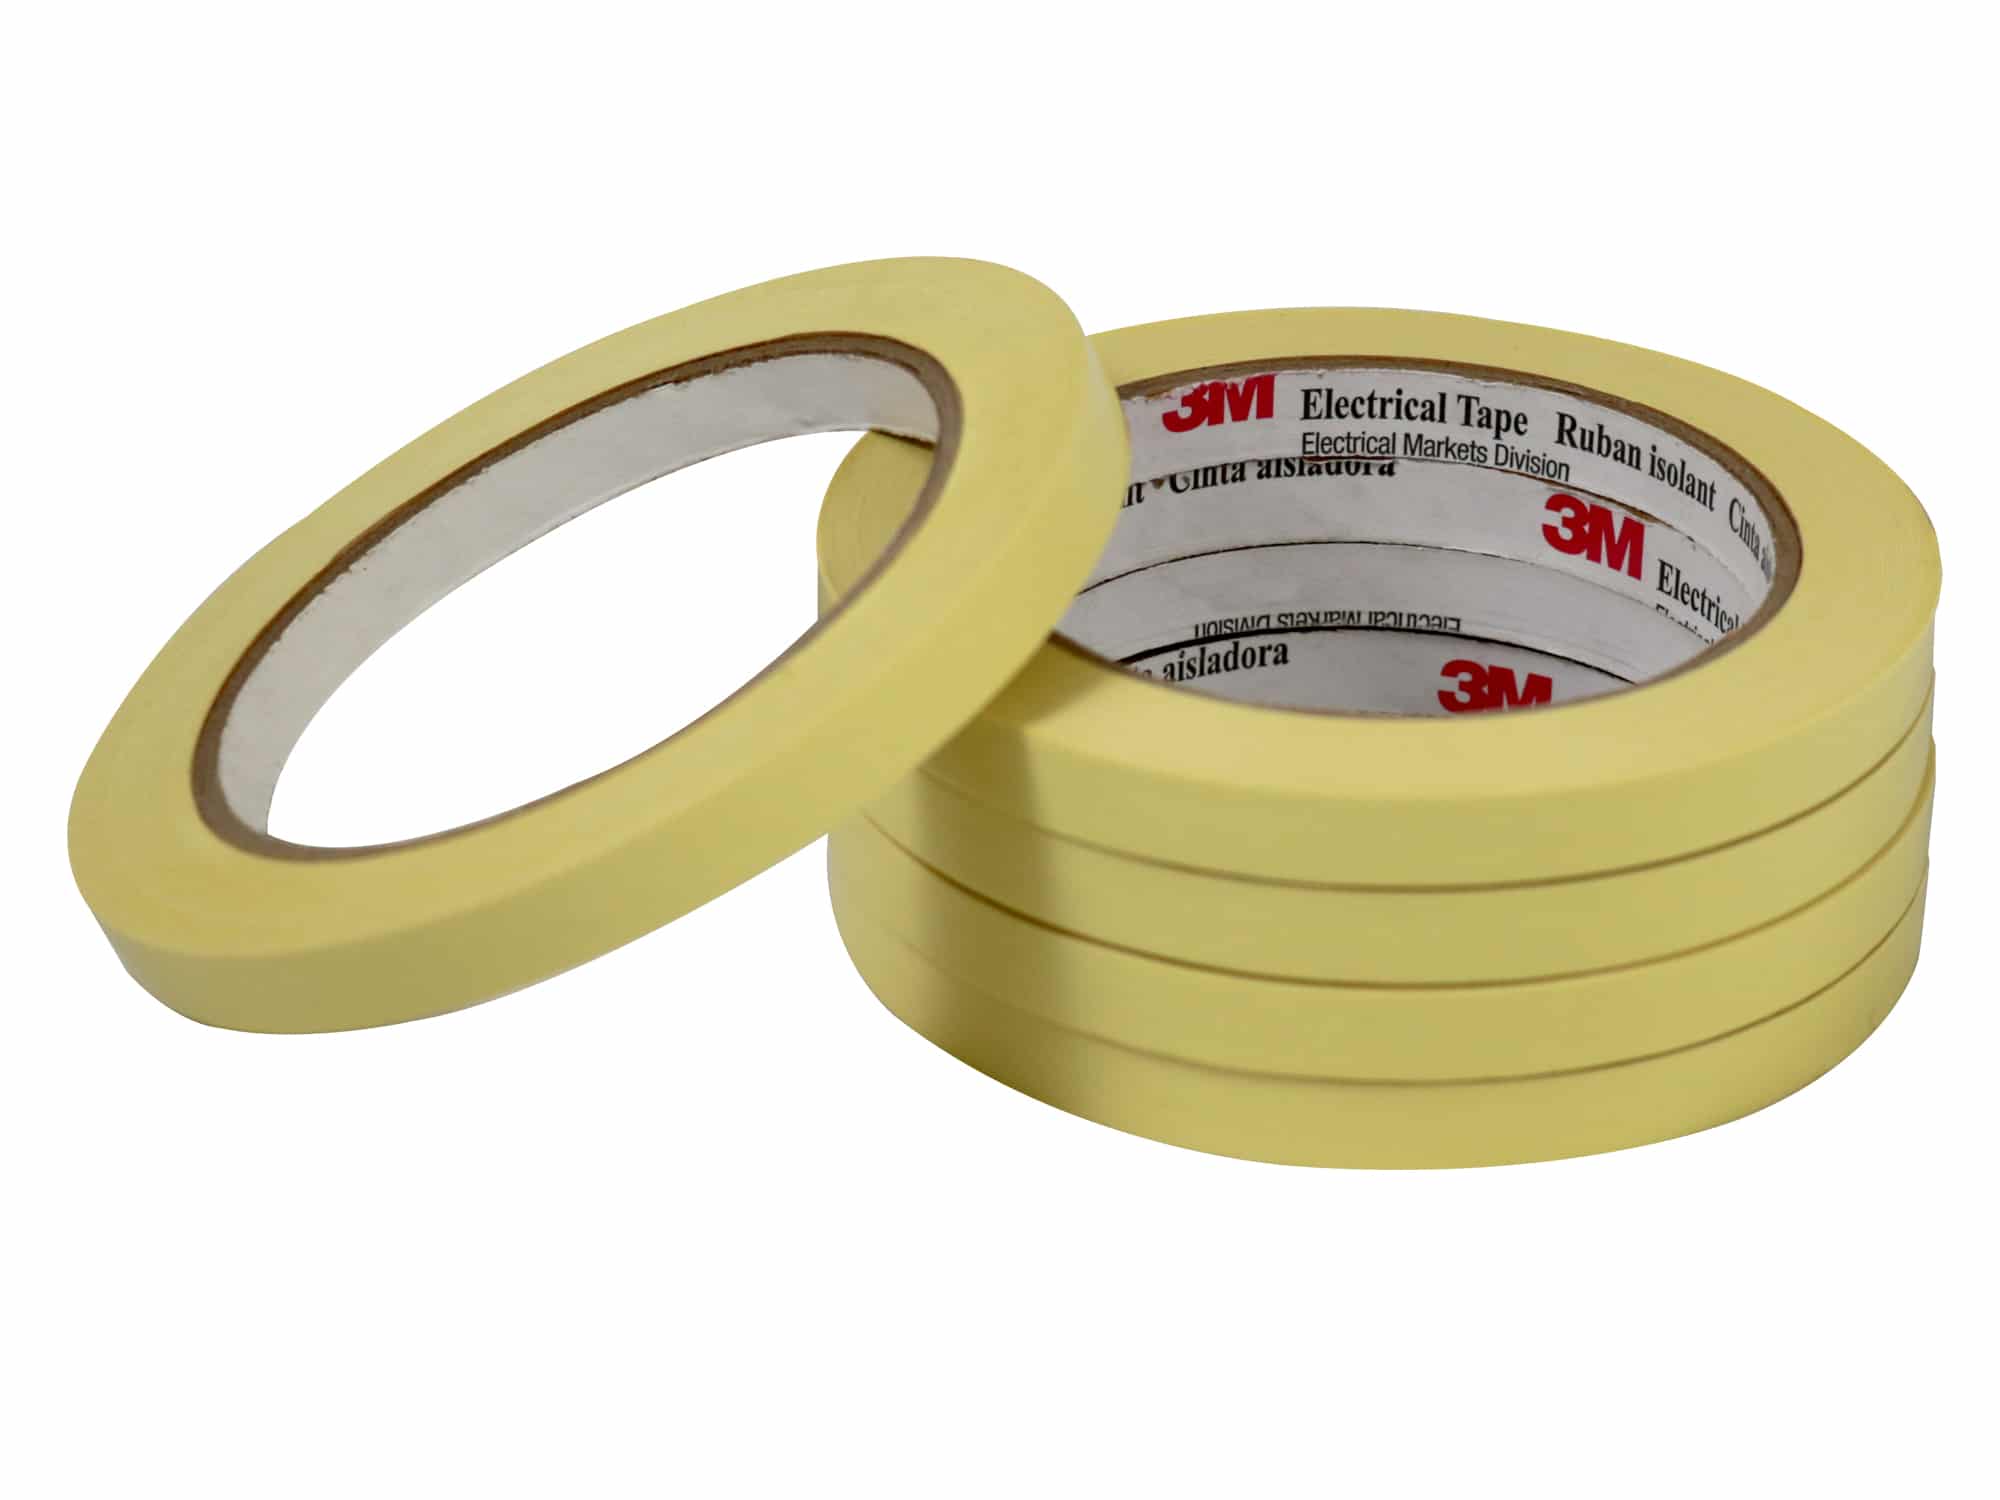 3M electrical tapes and adhesives